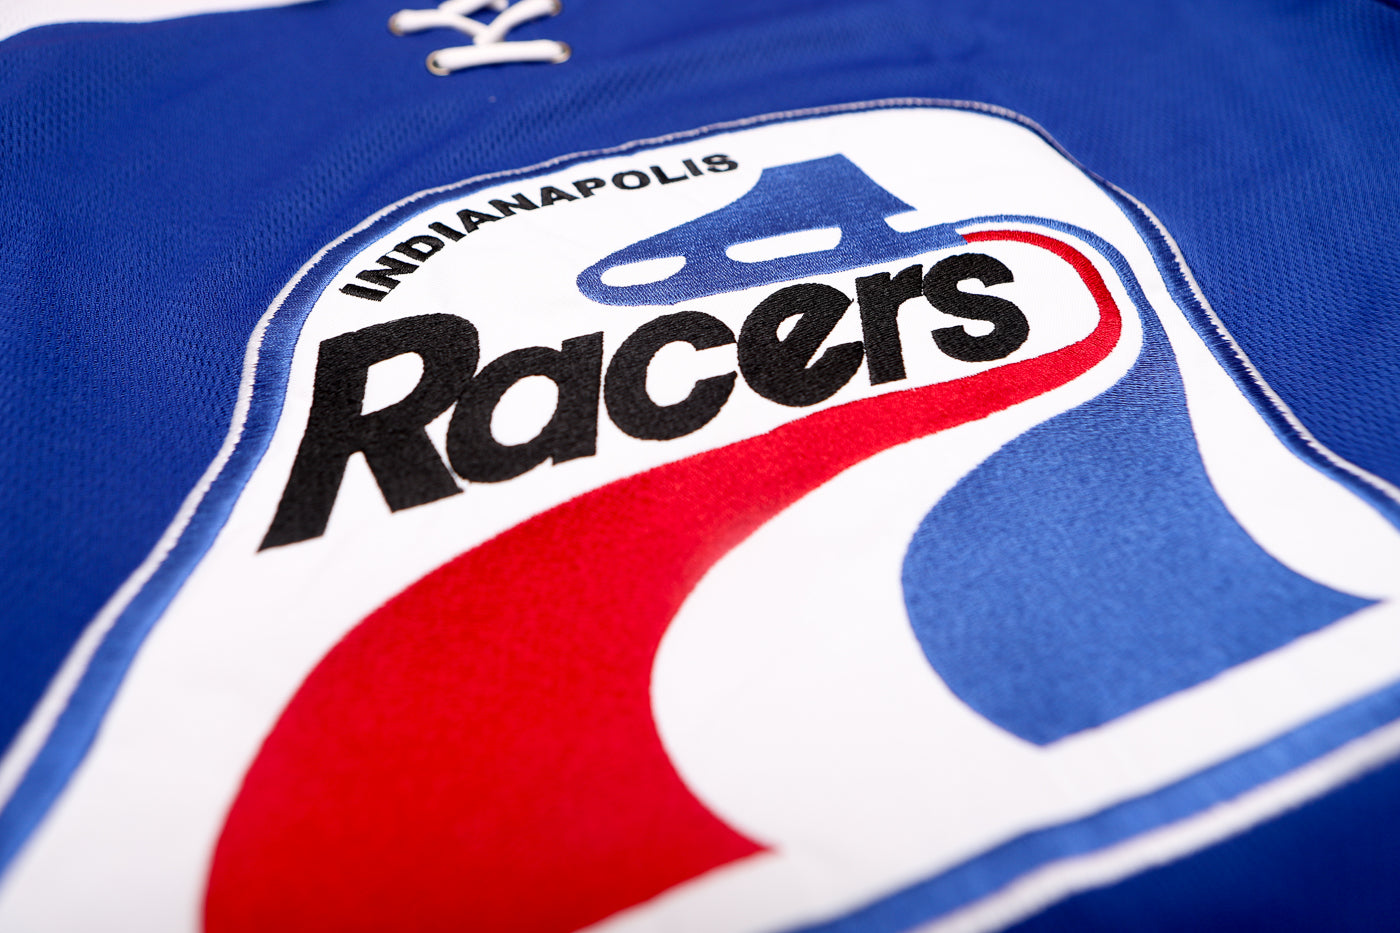 Indianapolis Racers 1978-79 Replica Jersey (BLANK)